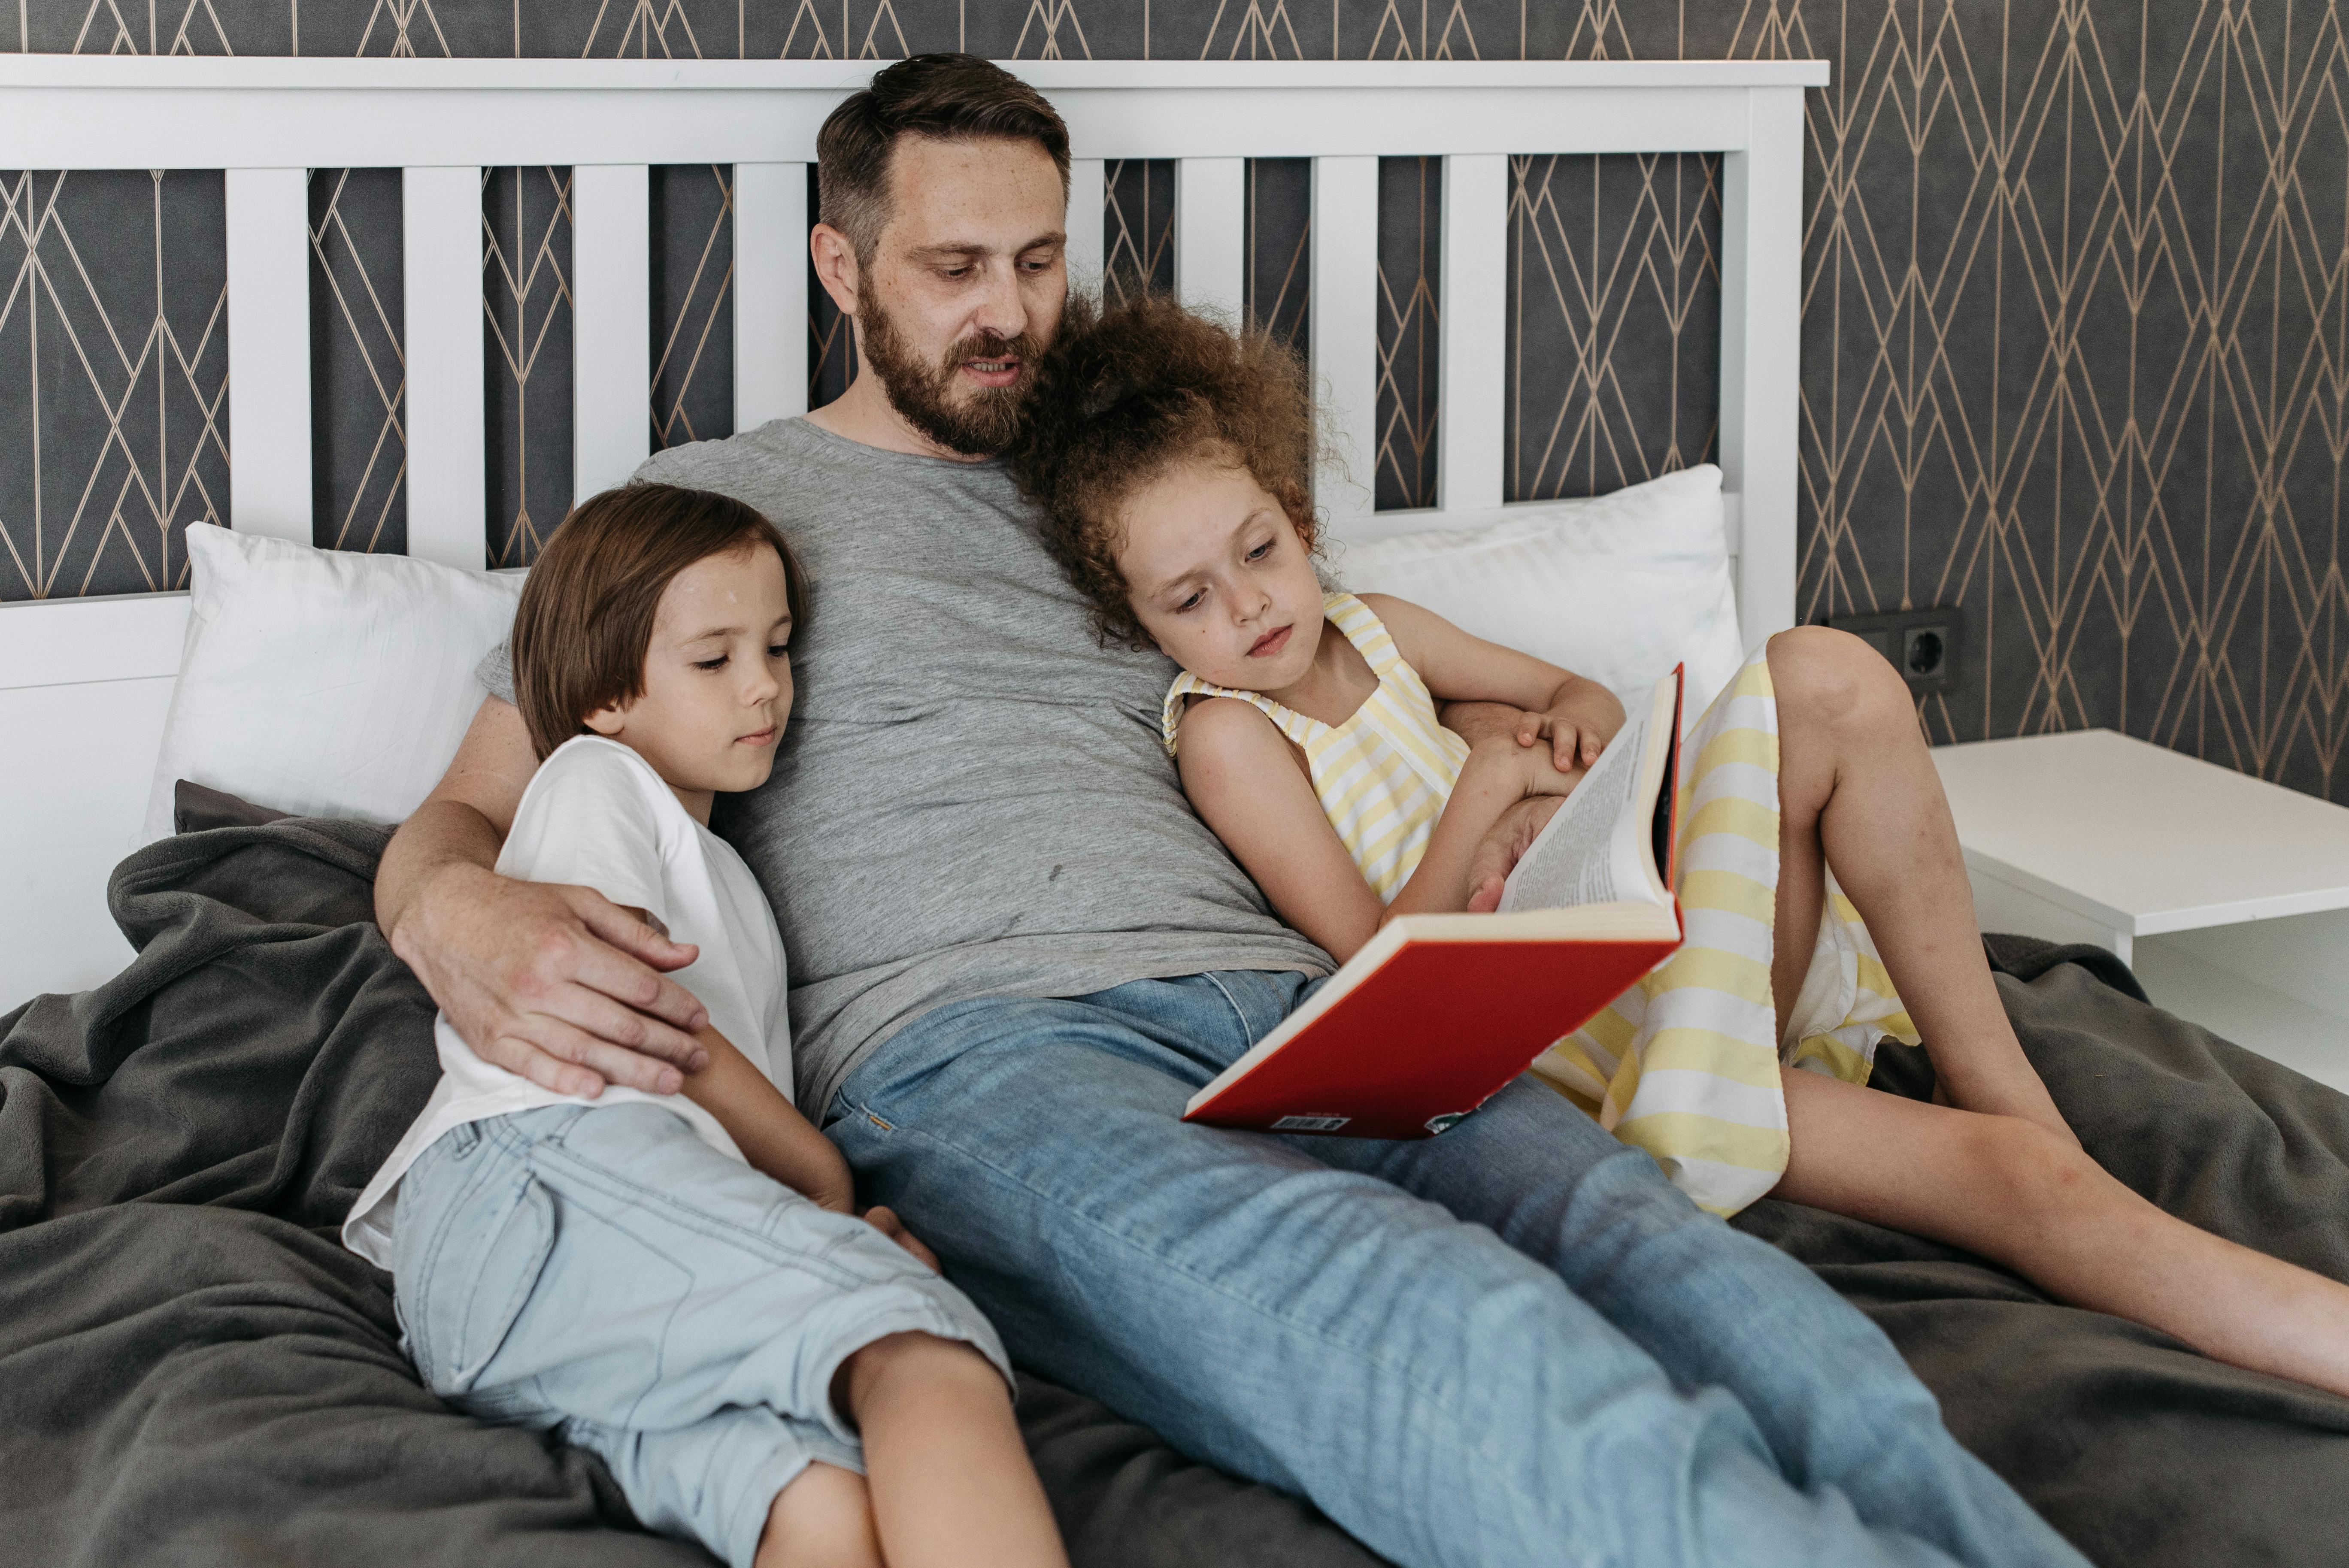 A father reading a bedtime story to his children | Source: Pexels